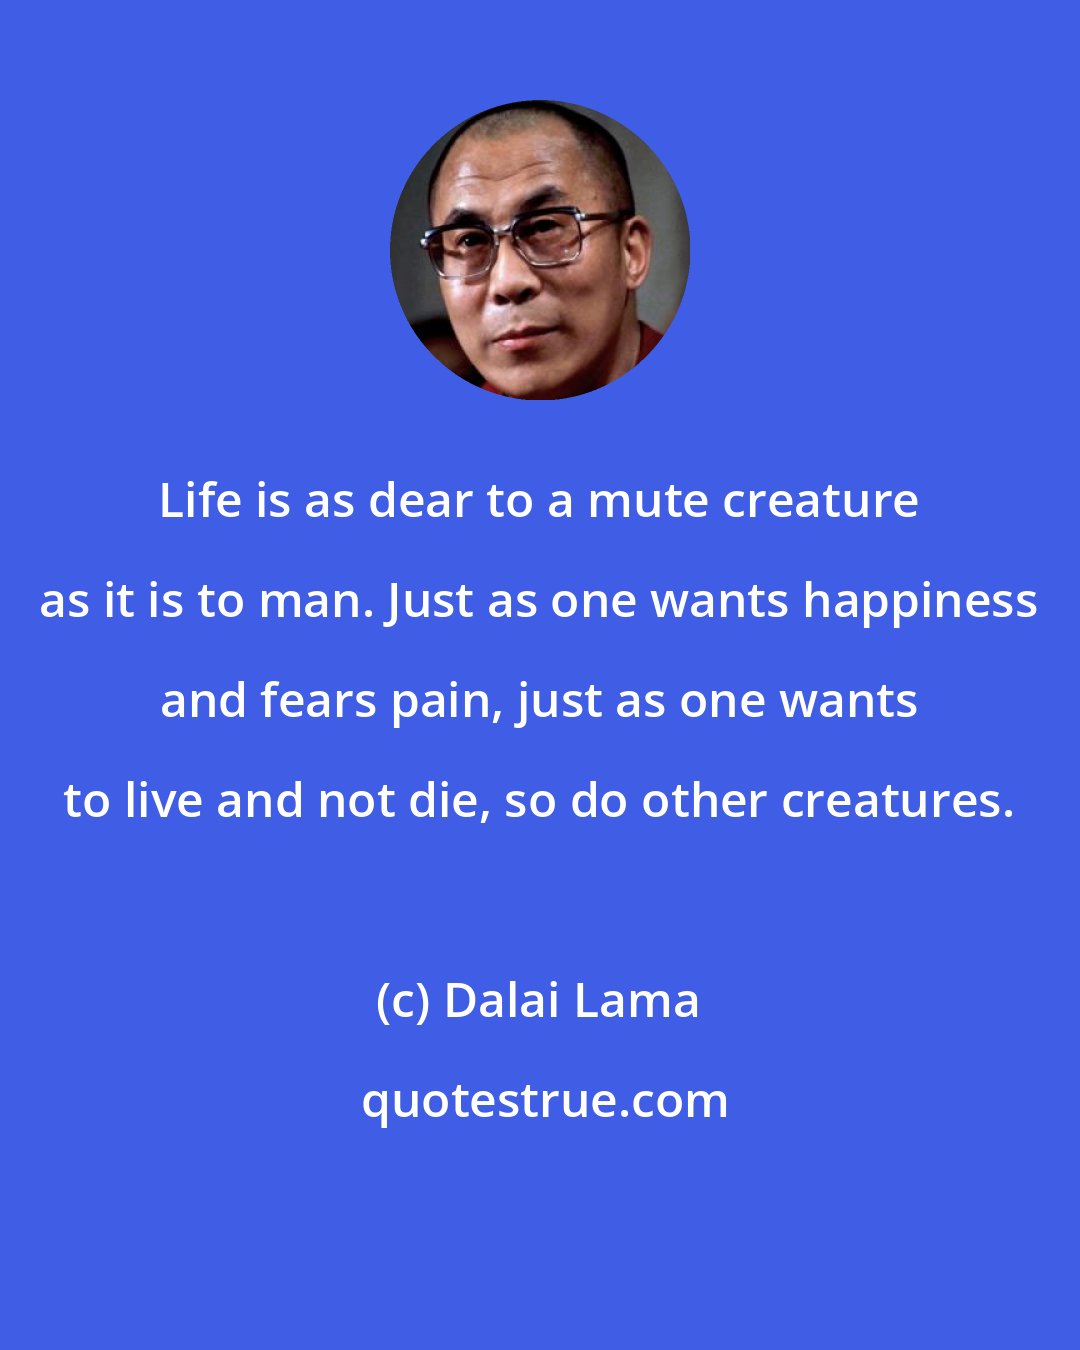 Dalai Lama: Life is as dear to a mute creature as it is to man. Just as one wants happiness and fears pain, just as one wants to live and not die, so do other creatures.